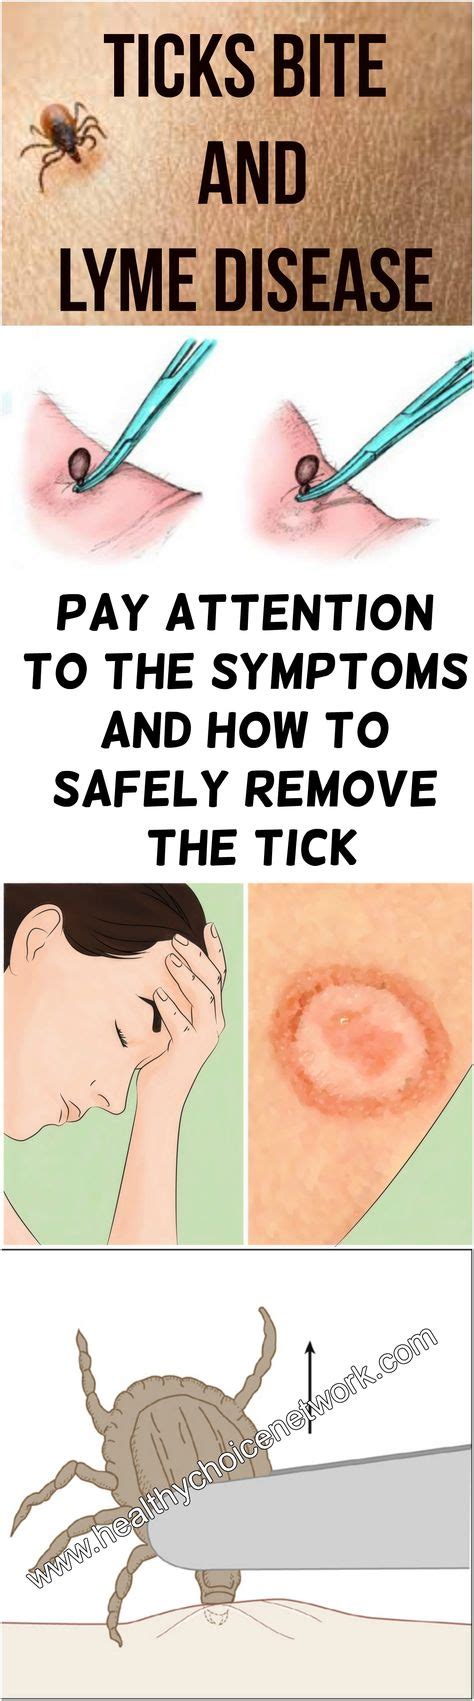 Ticks Bite And Lyme Disease Pay Attention To The Symptoms And How To